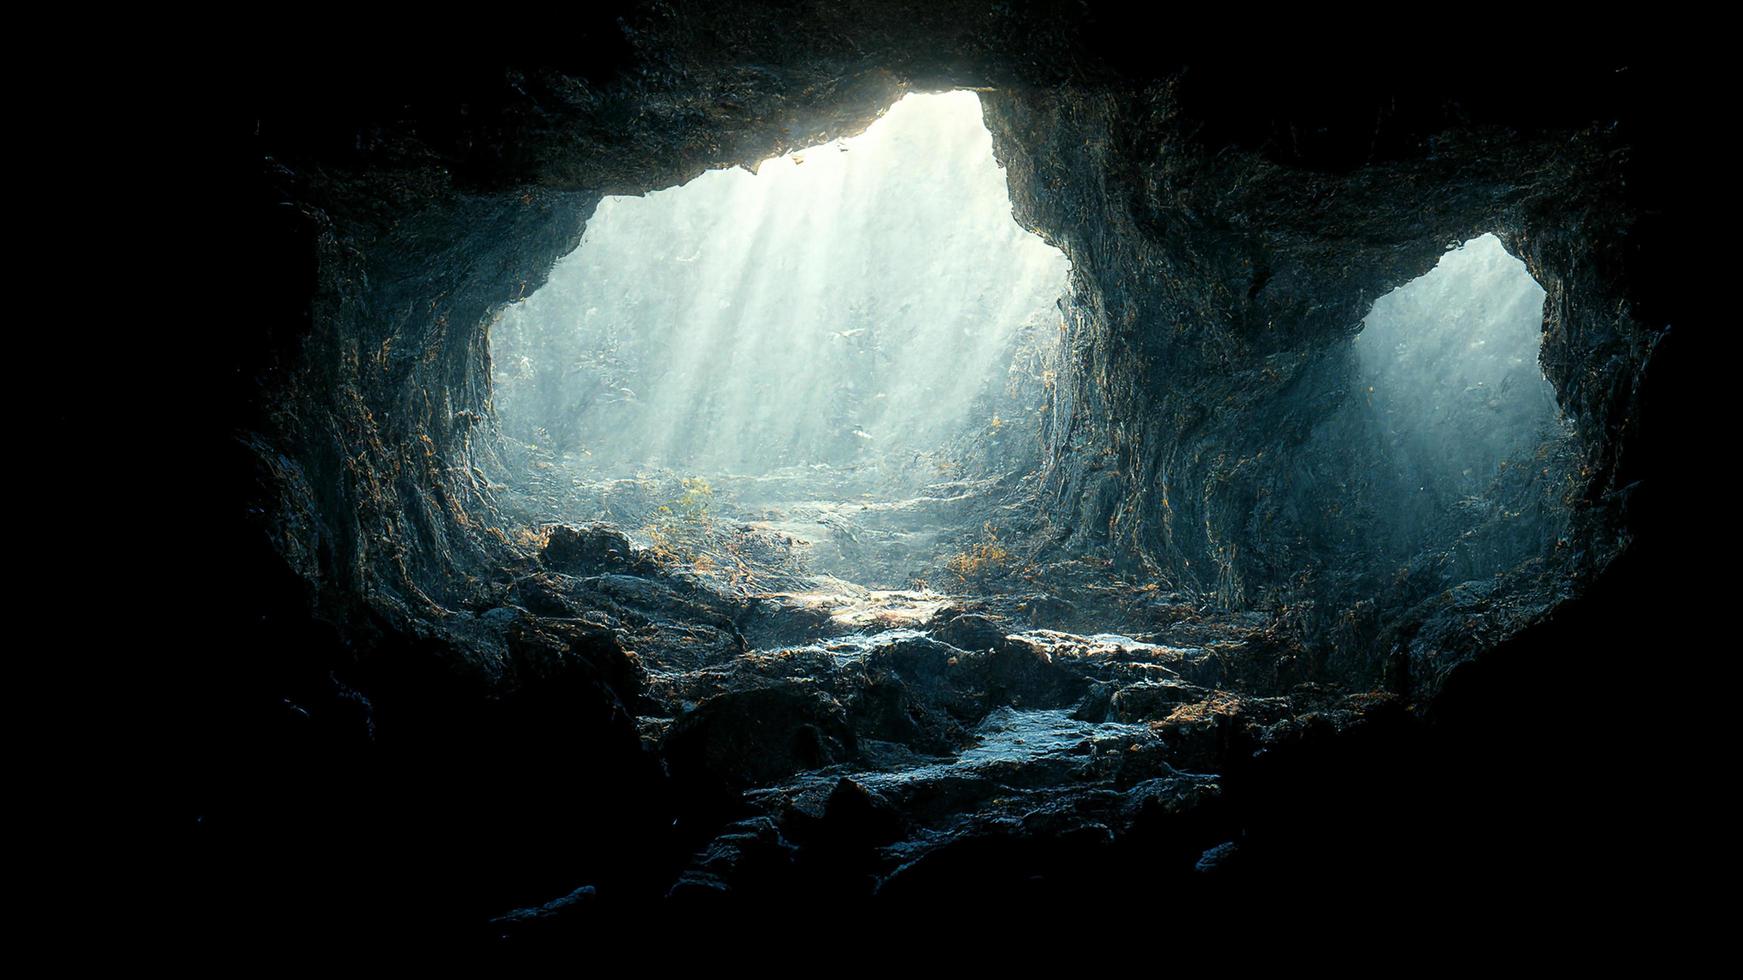 Dramatic light in dark cave landscape, mysterious and surreal, digital art photo